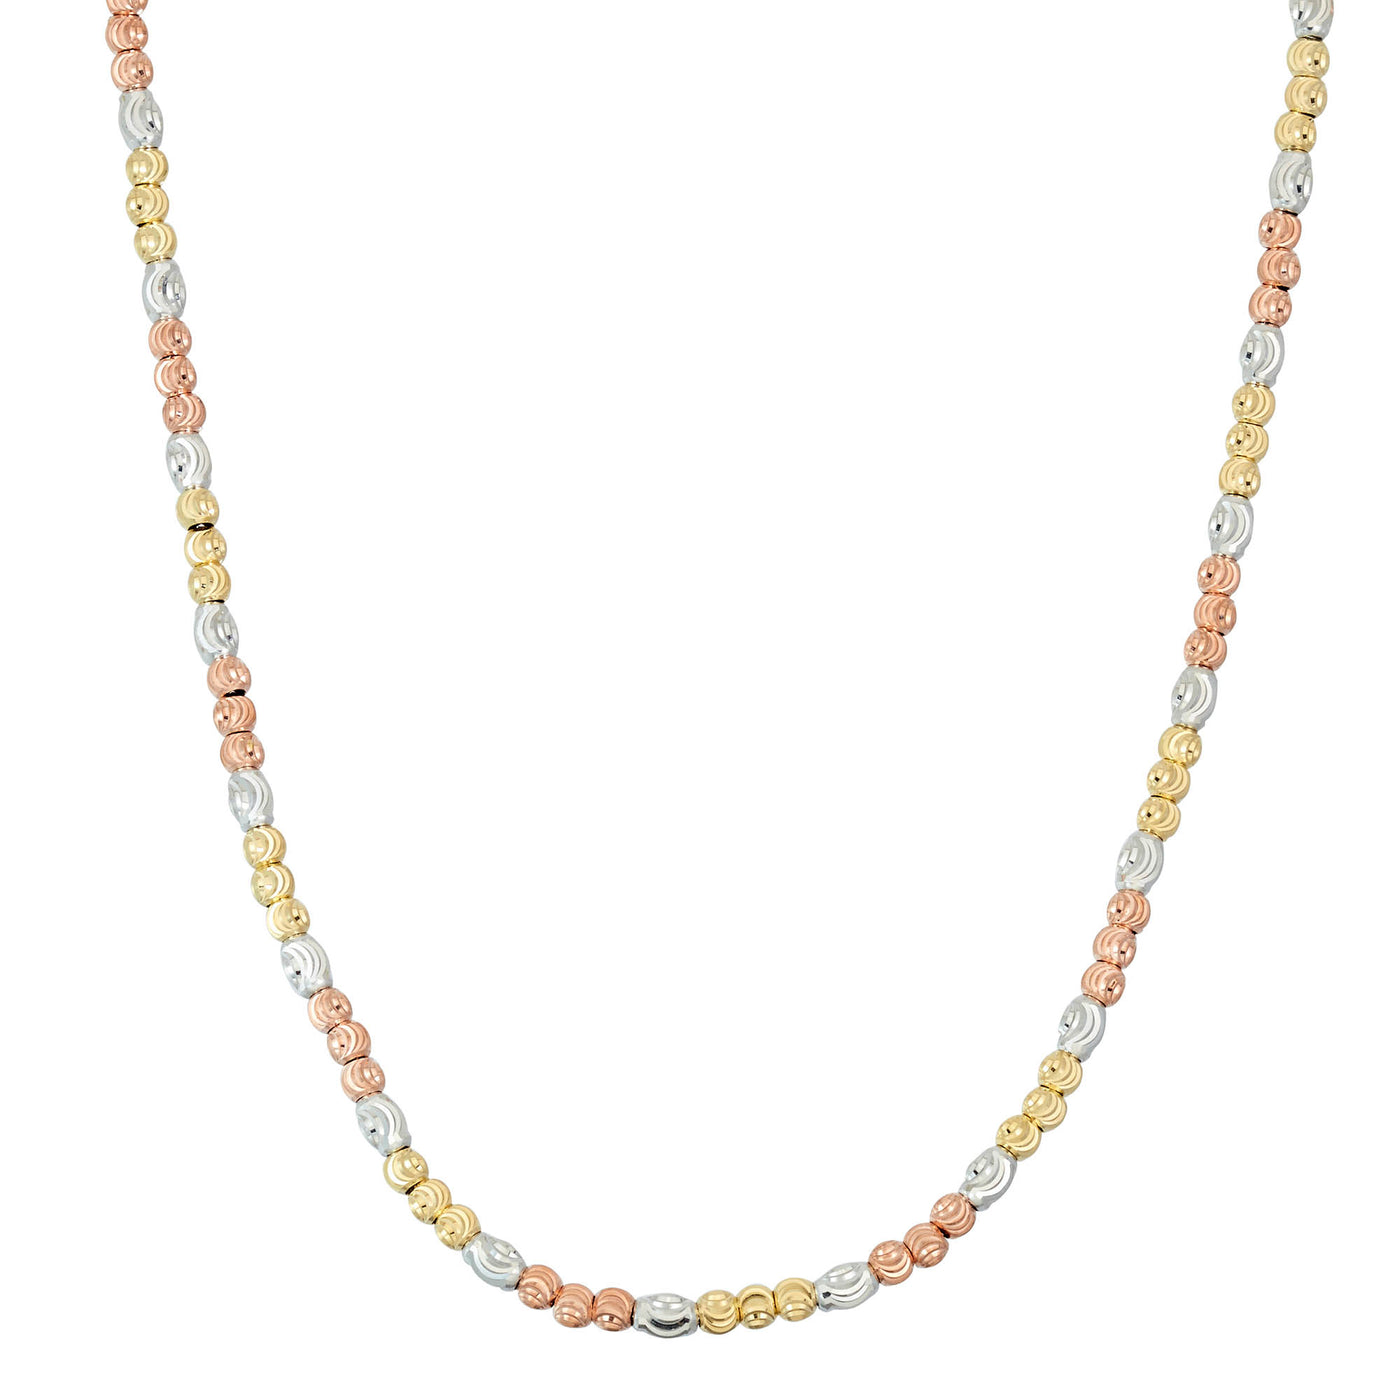 Rebecca Sloane Tri-Color Necklace with Oval Faceted Beads